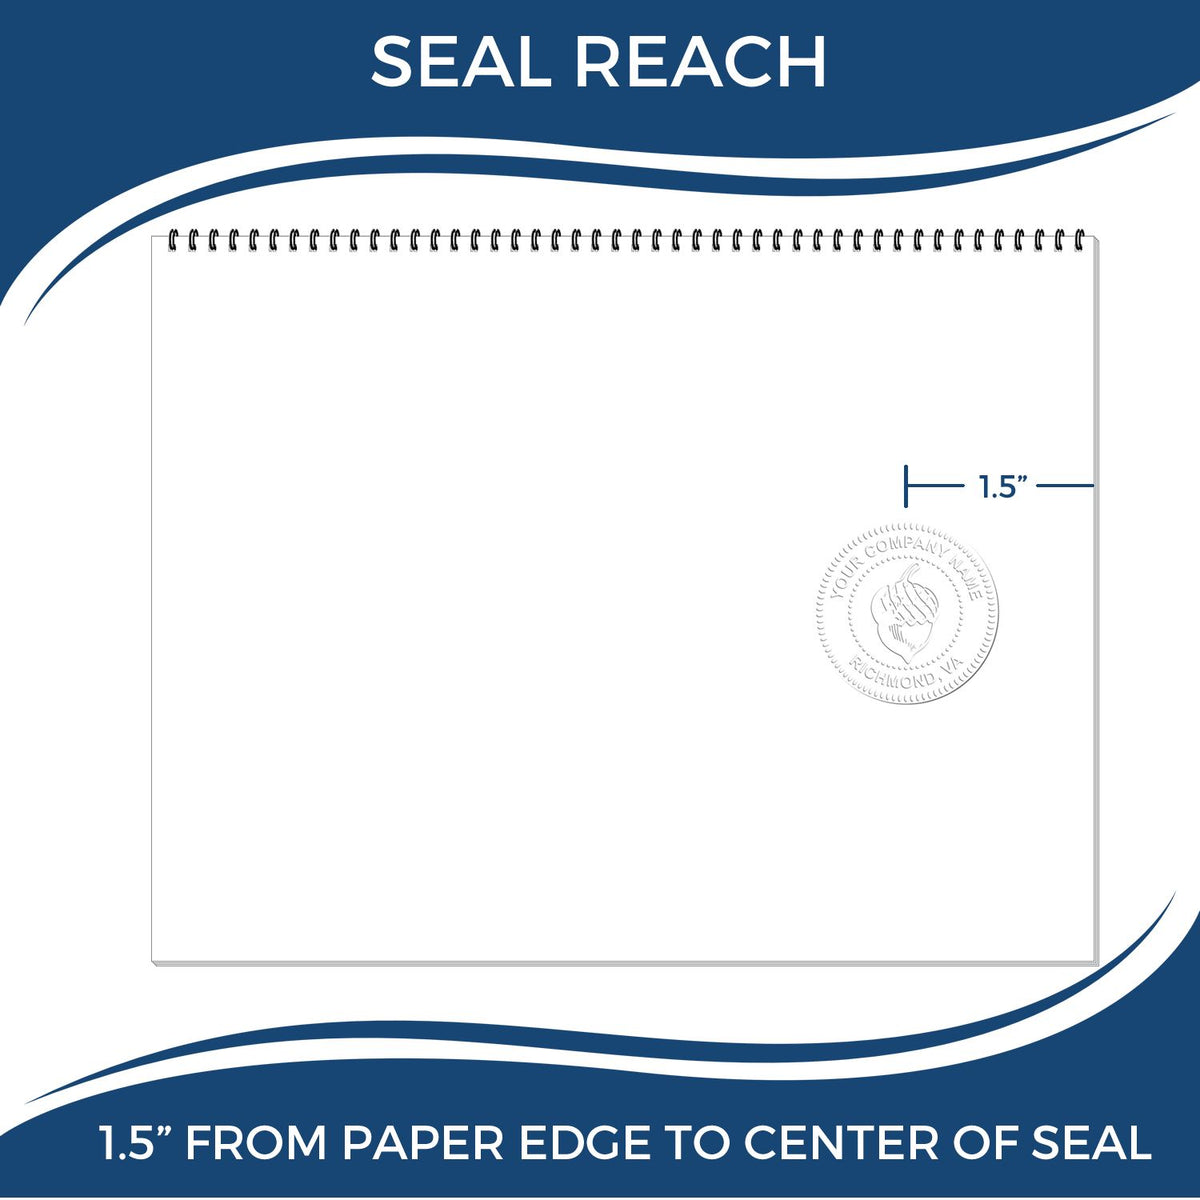 An infographic showing the seal reach which is represented by a ruler and a miniature seal image of the Gift Mississippi Land Surveyor Seal